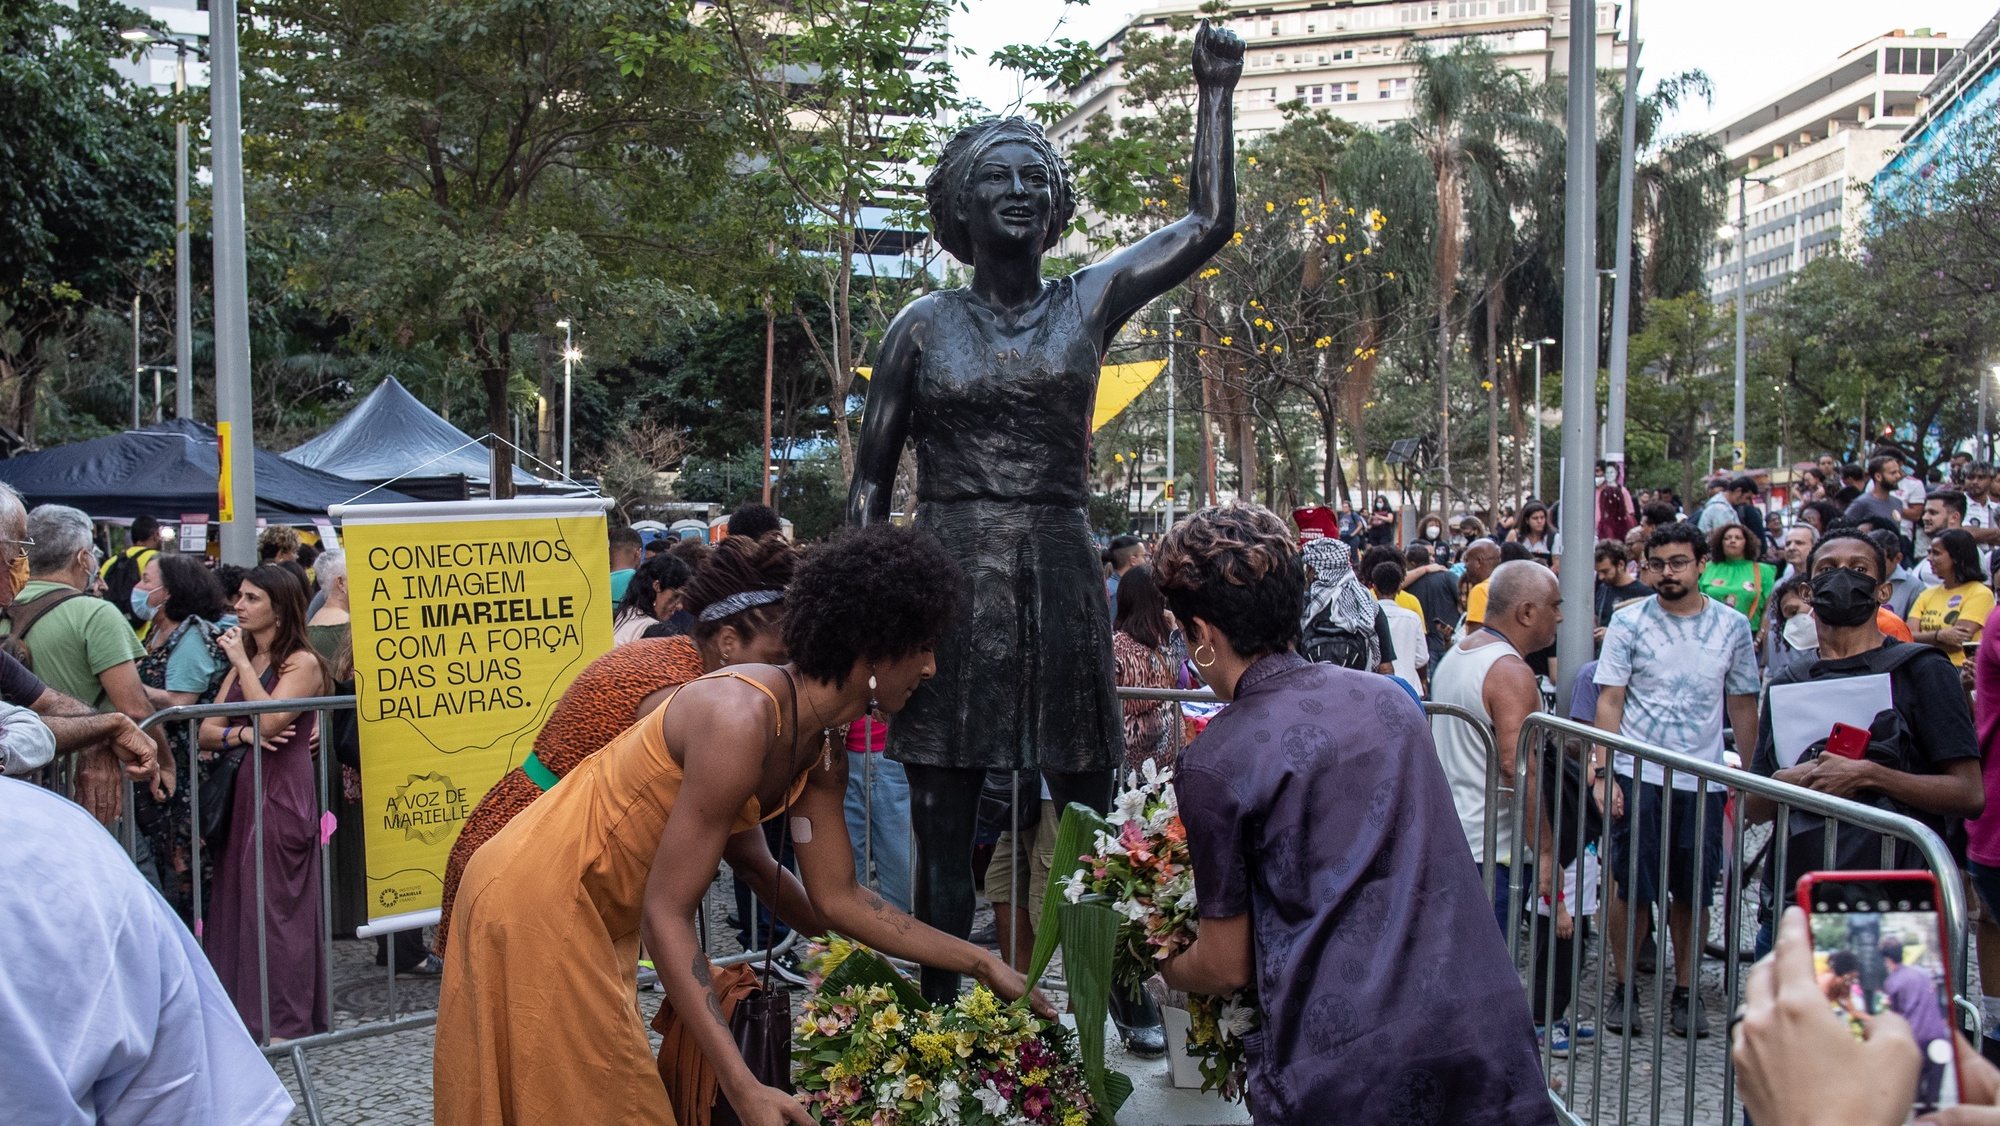 epa10094697 People gather around the life-size statue of former councilwoman Marielle Franco during its inauguration in downtown Rio de Janeiro, Brazil, 27 July 2022. The Brazilian councilor, left-wing activist and human rights defender Marielle Franco, murdered in 2018 in a case still unpunished, can be remembered in the same place where she became famous as a politician thanks to the inauguration of a bronze statue in her tribute. The life-size statue (1.75 meters), sculpted by the artist Edgar Duvidier, was unveiled at the Buraco do Lume, an emblematic place in downtown Rio de Janeiro where the Rio de Janeiro councilor went every Friday to talk with her constituents.  EPA/Andre Coelho